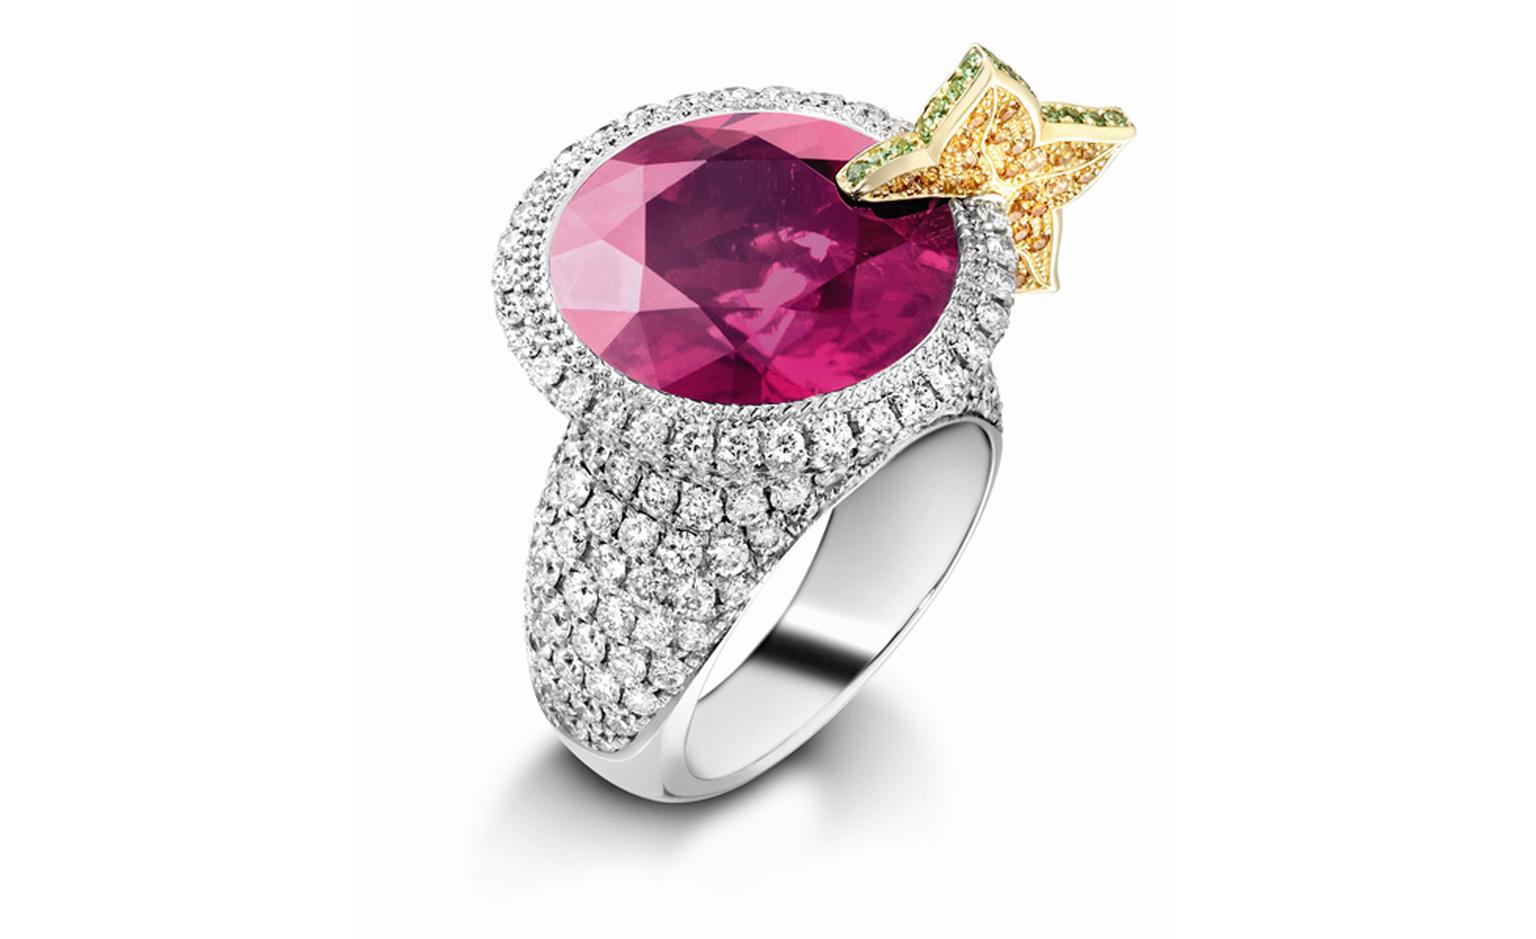 PIAGET, Limelight Cocktail inspiration, Cosmopolitan Ring in white gold with diamonds, pink rubellite and citrine. POA